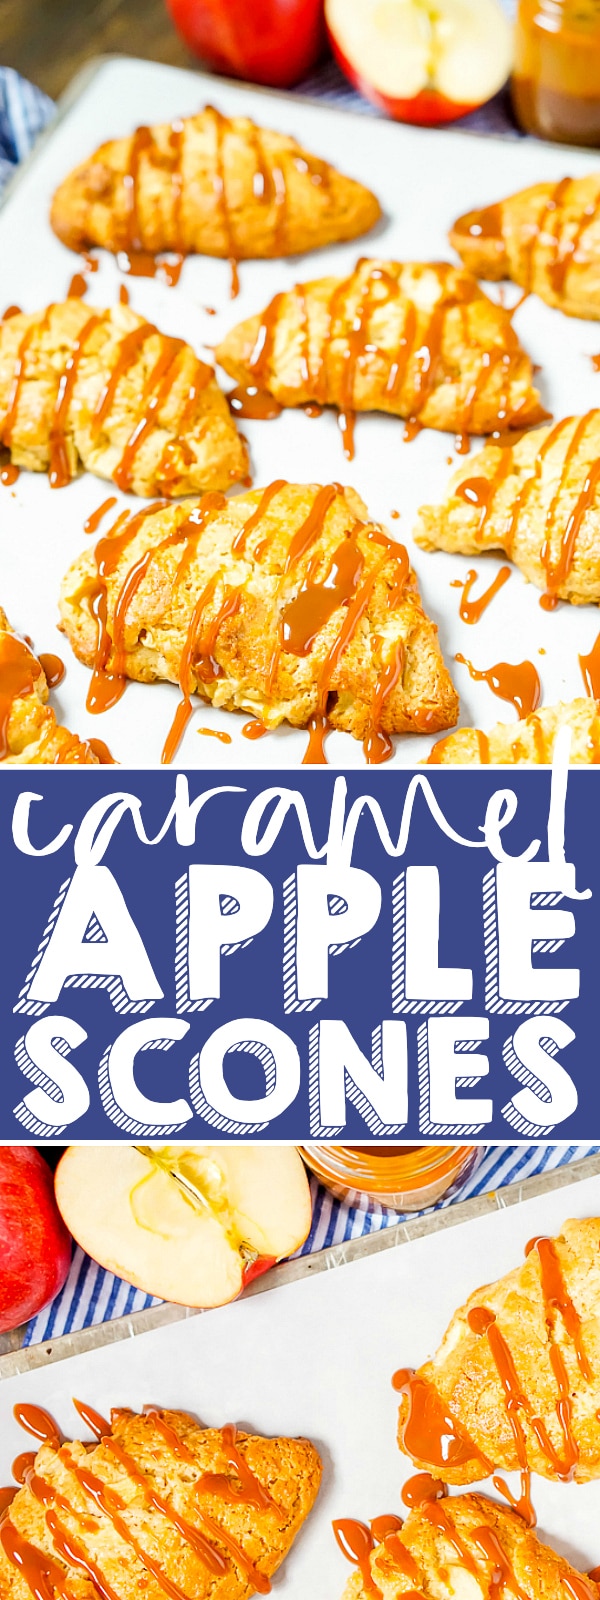 Caramel Apple Scones - Start your fall mornings and holidays off with a delicious caramel apple scone filled with fresh apple bites! A perfect Thanksgiving breakfast or Christmas breakfast! | THE LOVE NERDS #applerecipe #sconerecipe #holidaybreakfast #thanksgivingrecipe